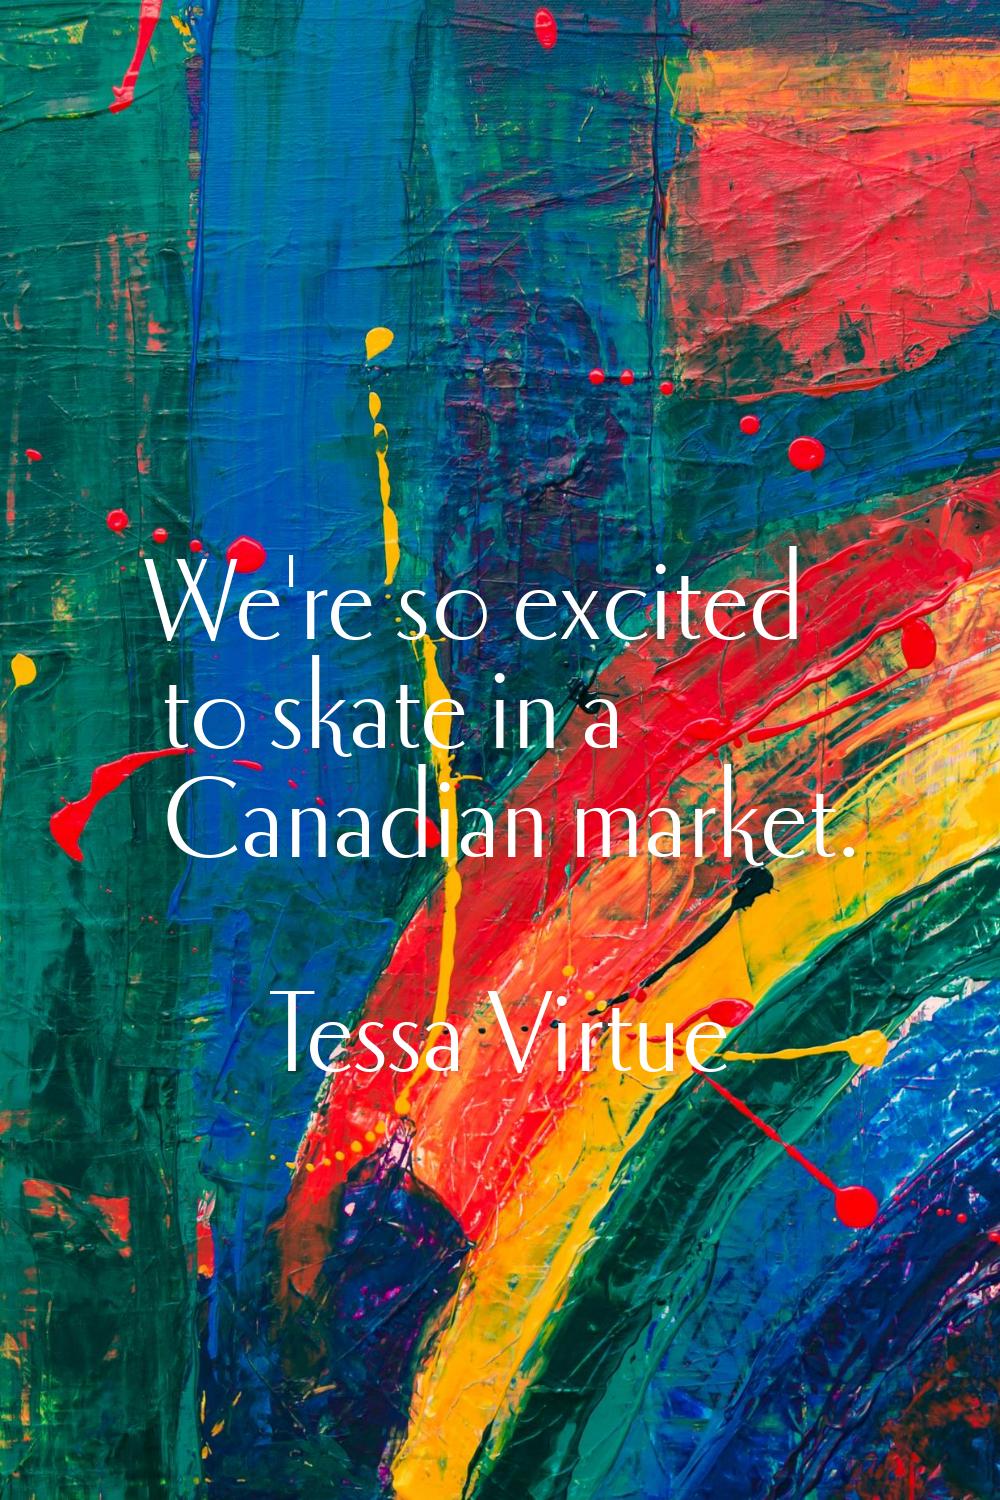 We're so excited to skate in a Canadian market.